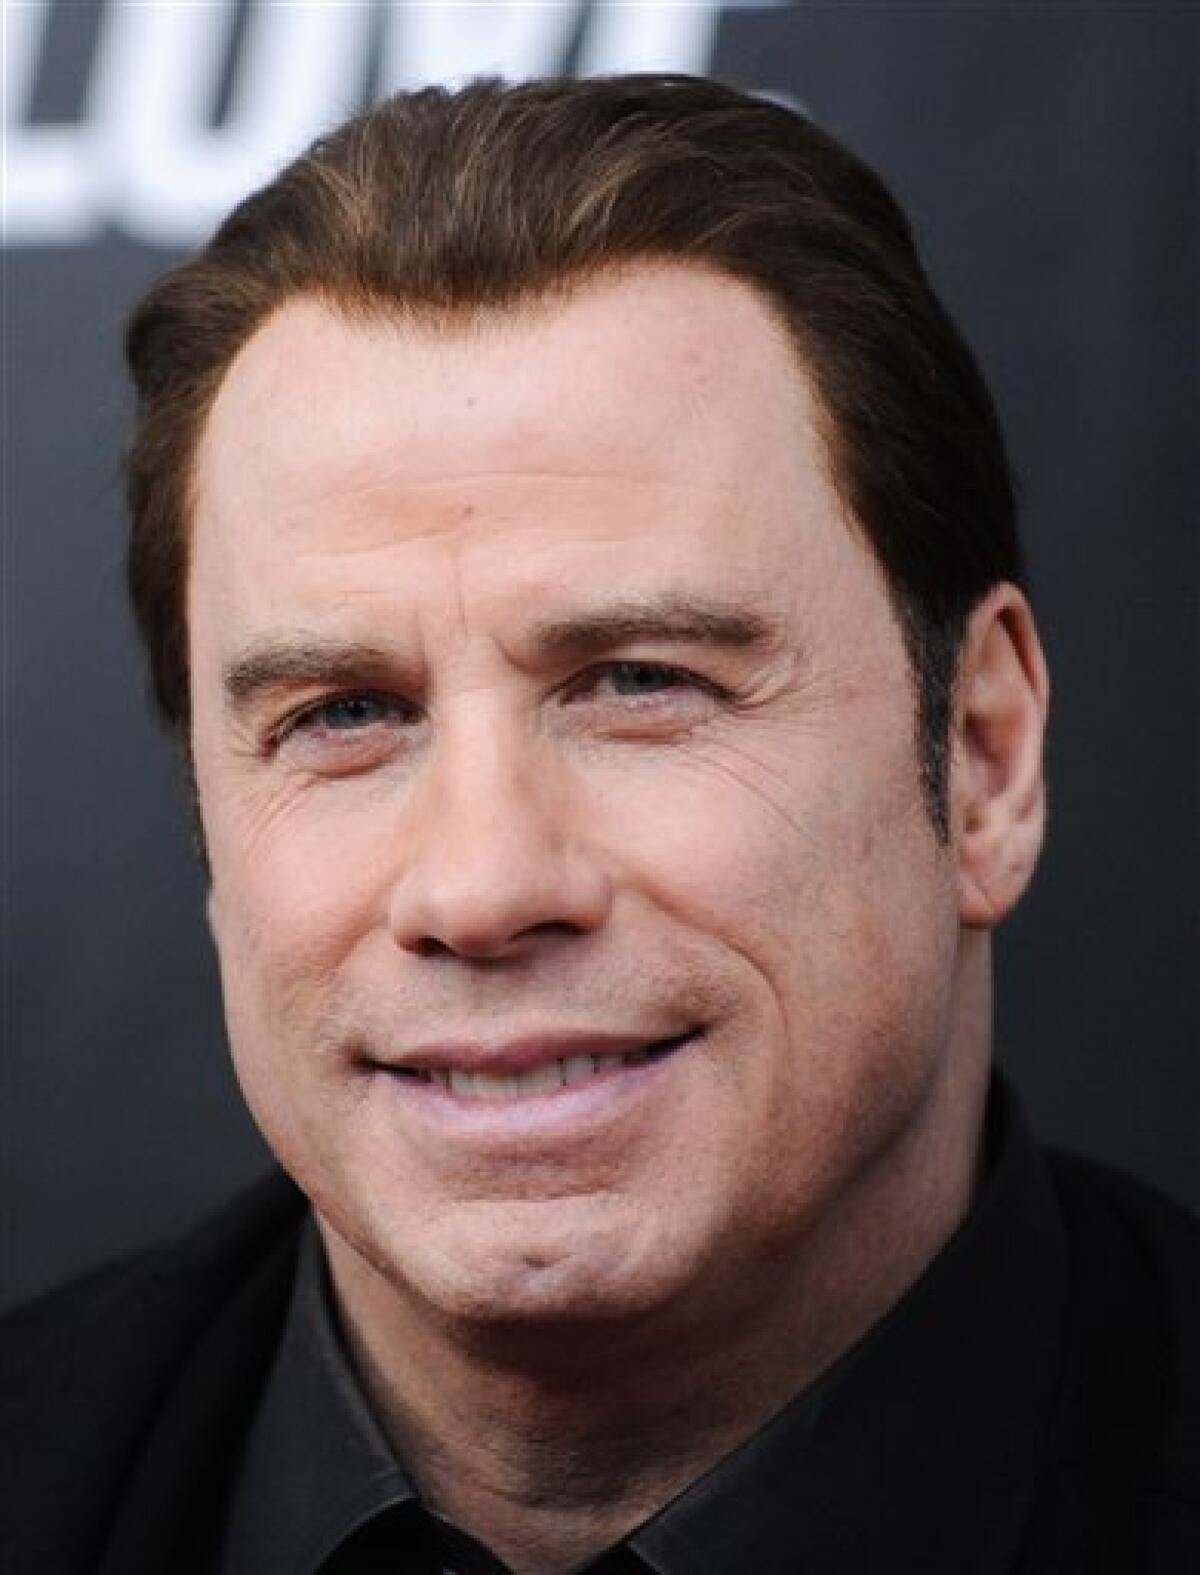 FILE - In this Jan. 28, 2010 file photo, actor John Travolta attends the premiere of "From Paris With Love" at the Ziegfeld Theatre in New York. (AP Photo/Evan Agostini)